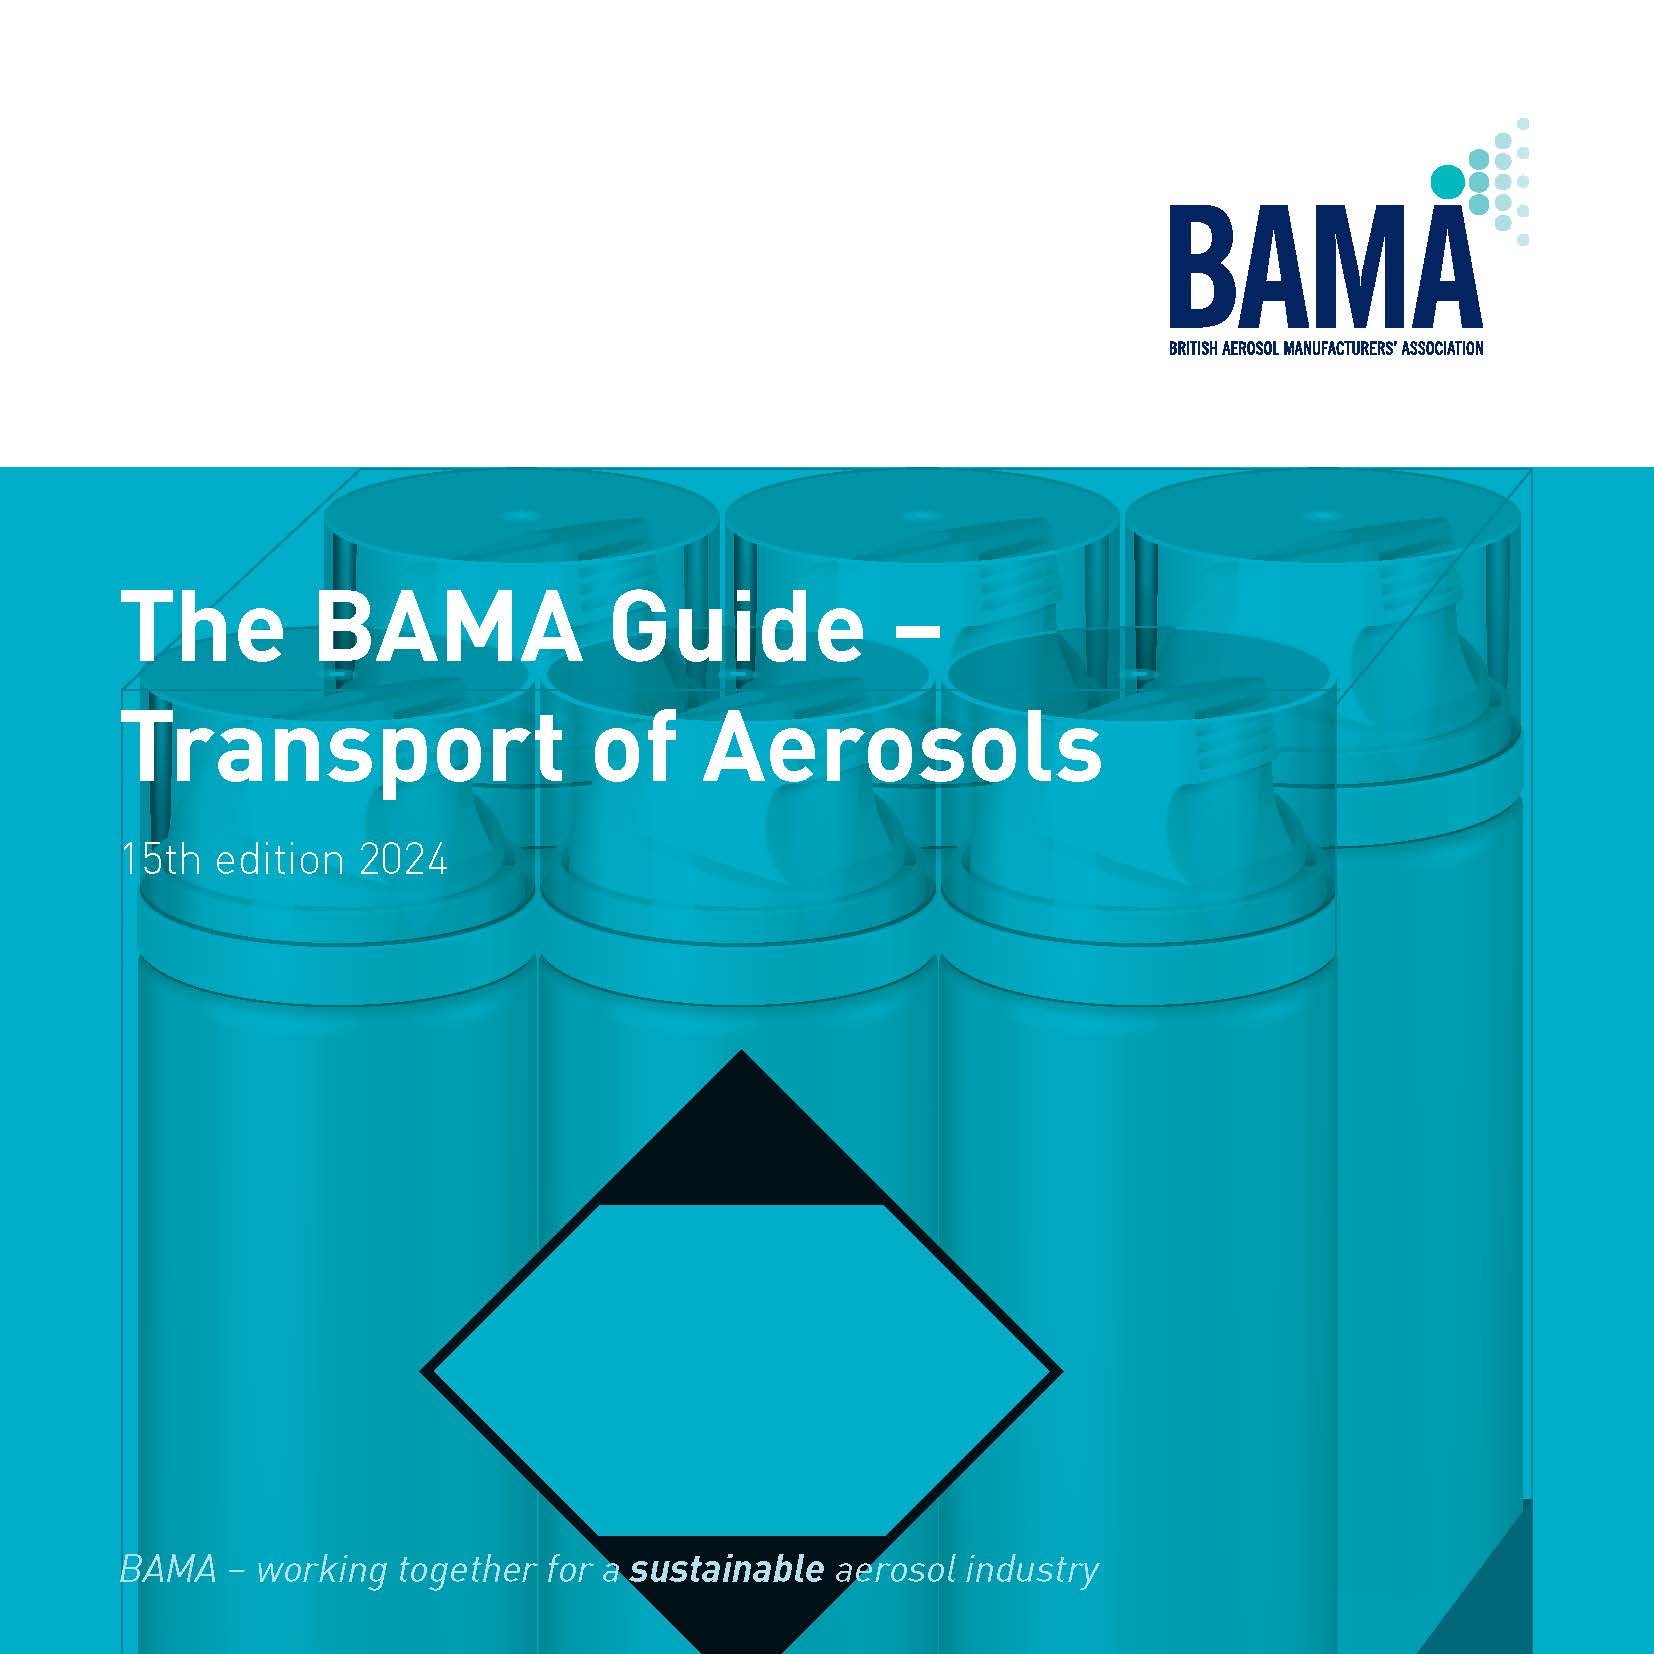 BAMA Guide to the Transport of Aerosols